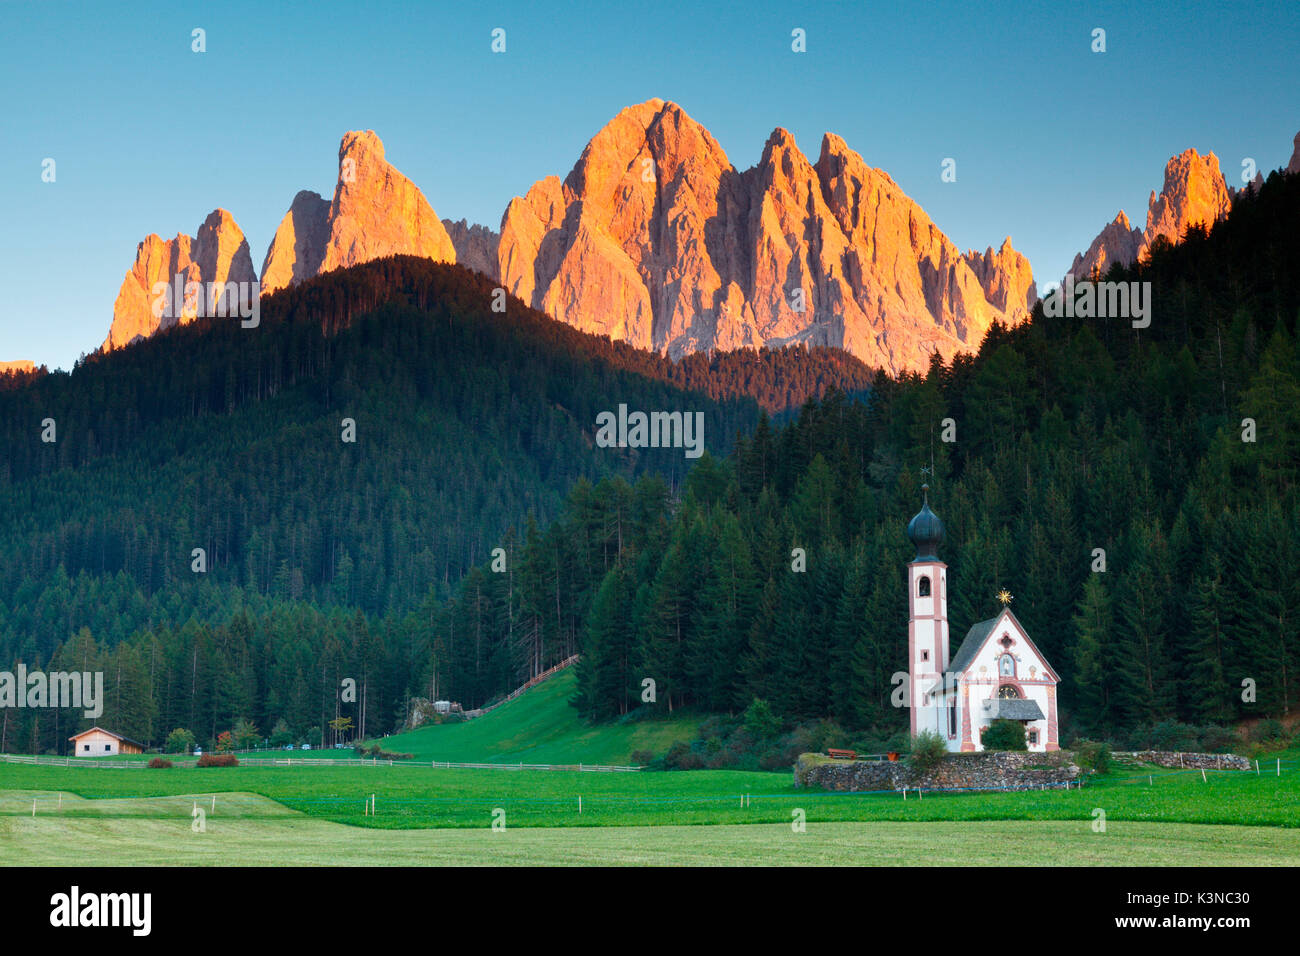 Funes valley, Dolomites, Trentino Alto Adige, Italy. The picturesque small church San Giovanni in Ranui at under of Odle at sunset. Stock Photo